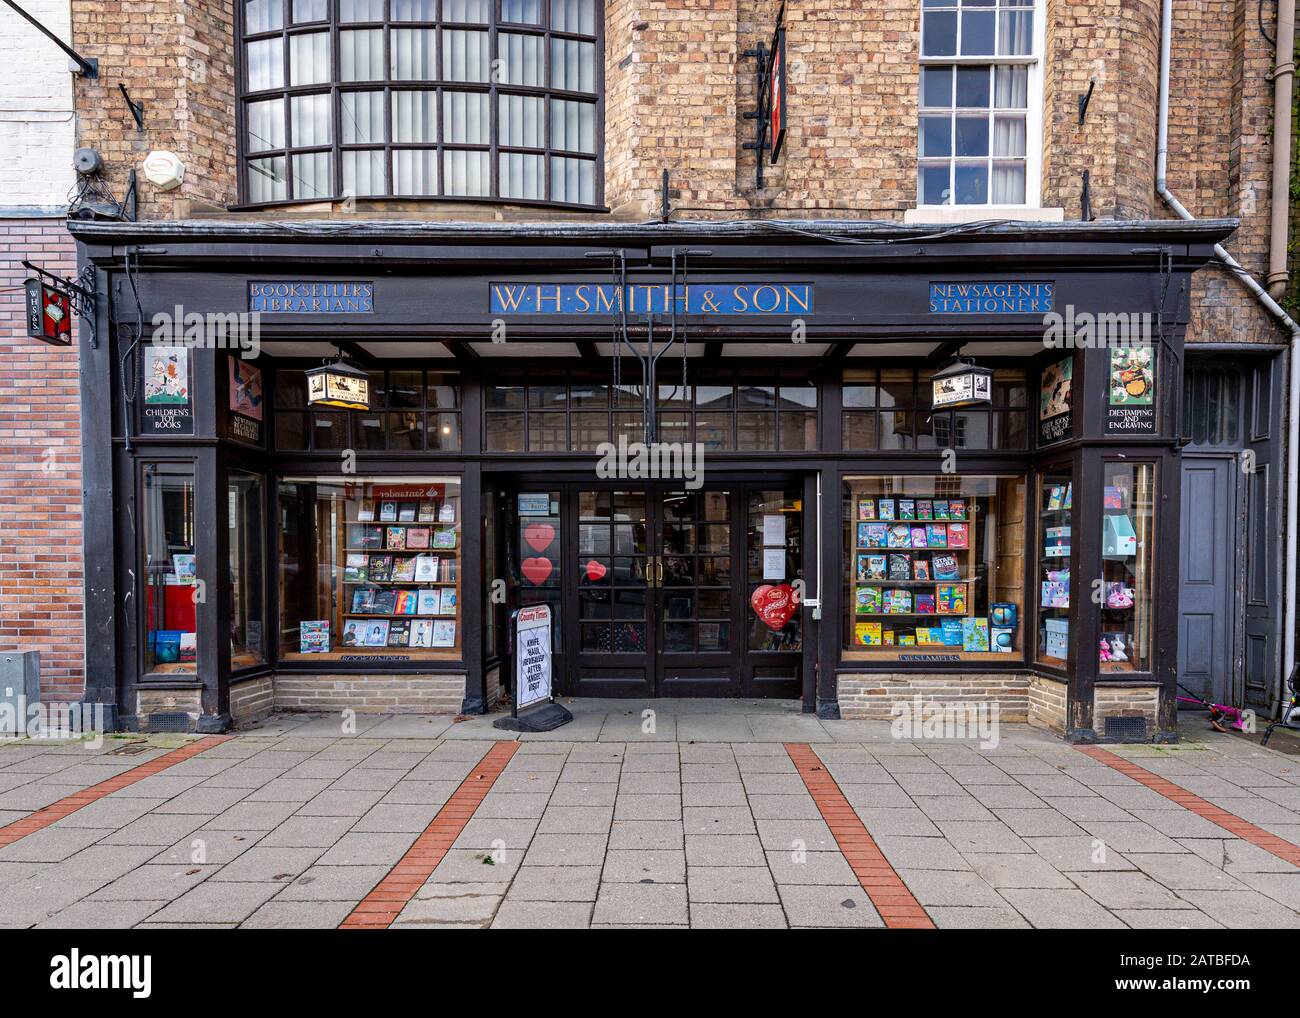 NEWTOWN, WALES. 01 Feb 2020. The Newtown branch of WH Smith at 24 High Street still in its original condition from when it opened in 1927. Stock Photo